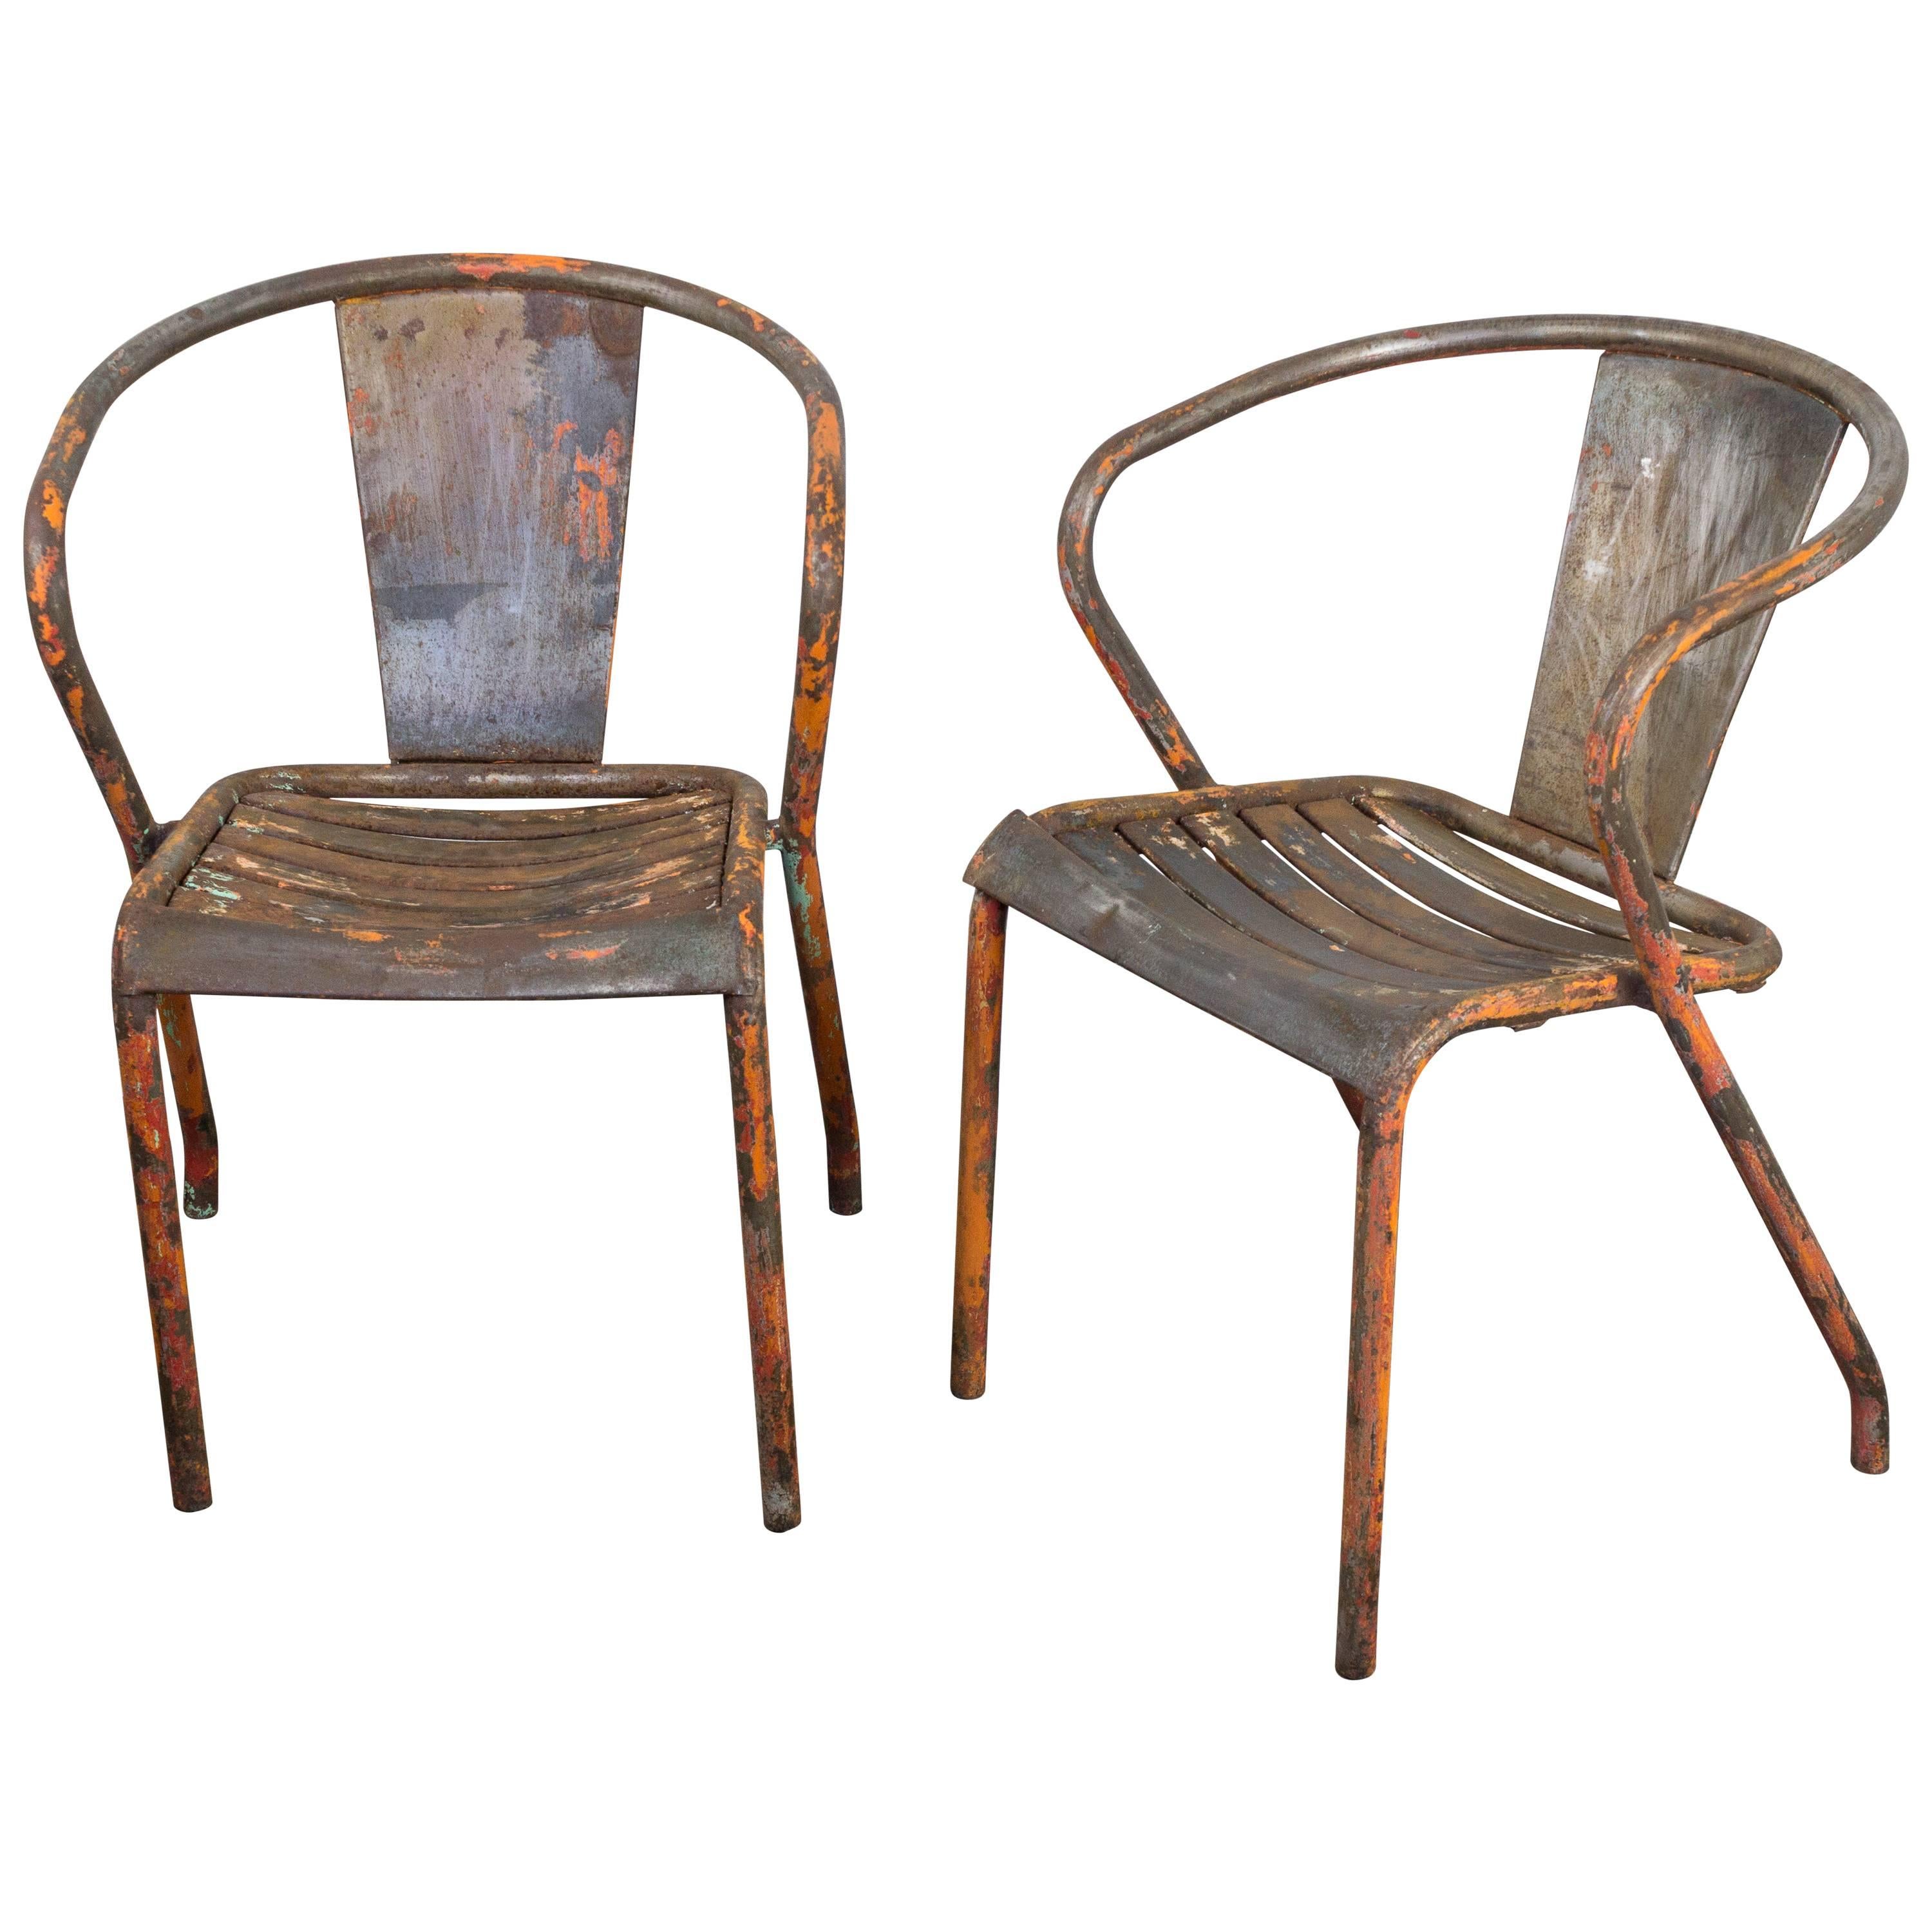 Pair of French Tolix Industrial Chairs with Distressed Orange Paint Finish